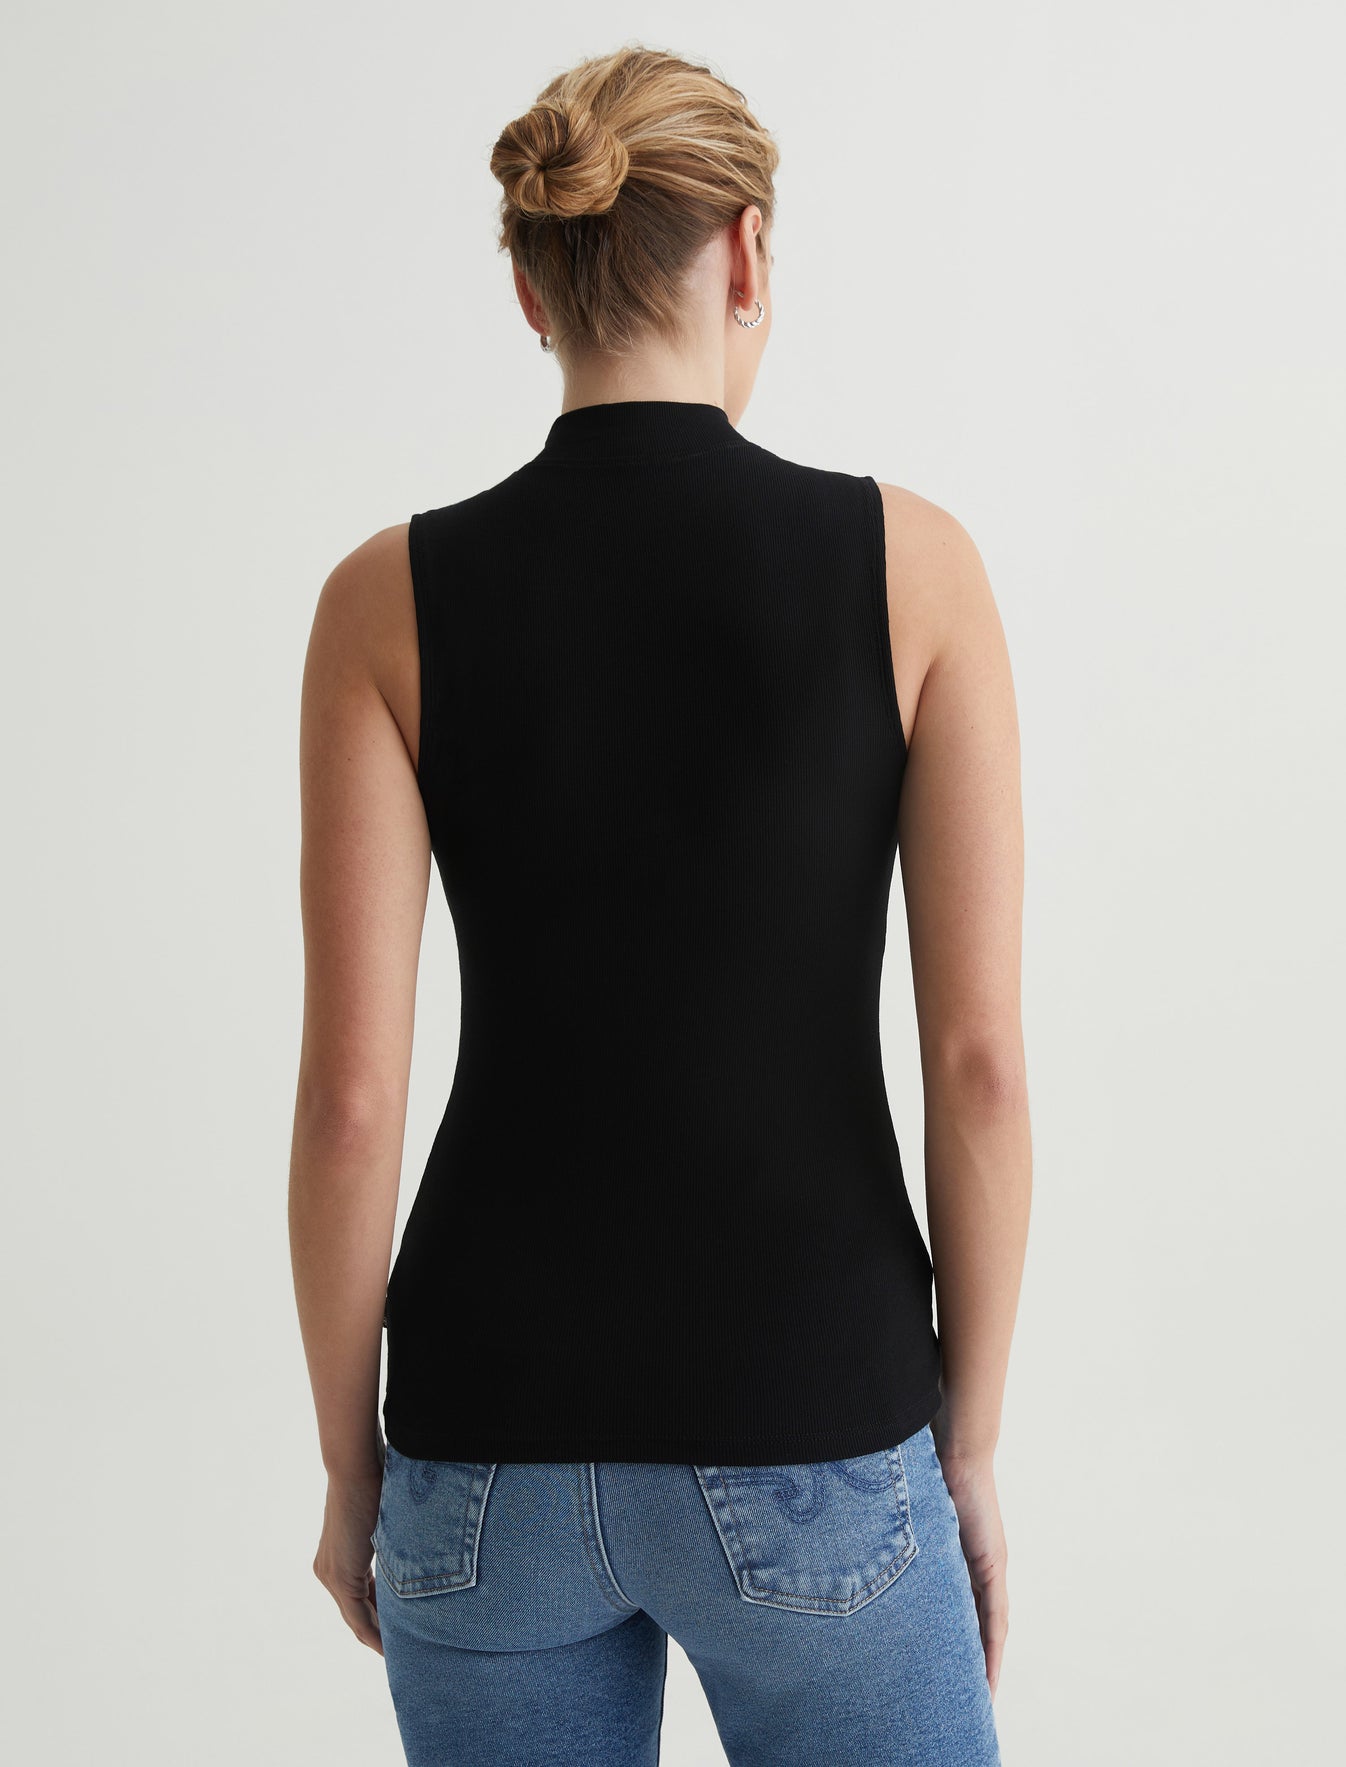 Womens Edie Sleeveless Turtleneck True Black at AG Jeans Official Store